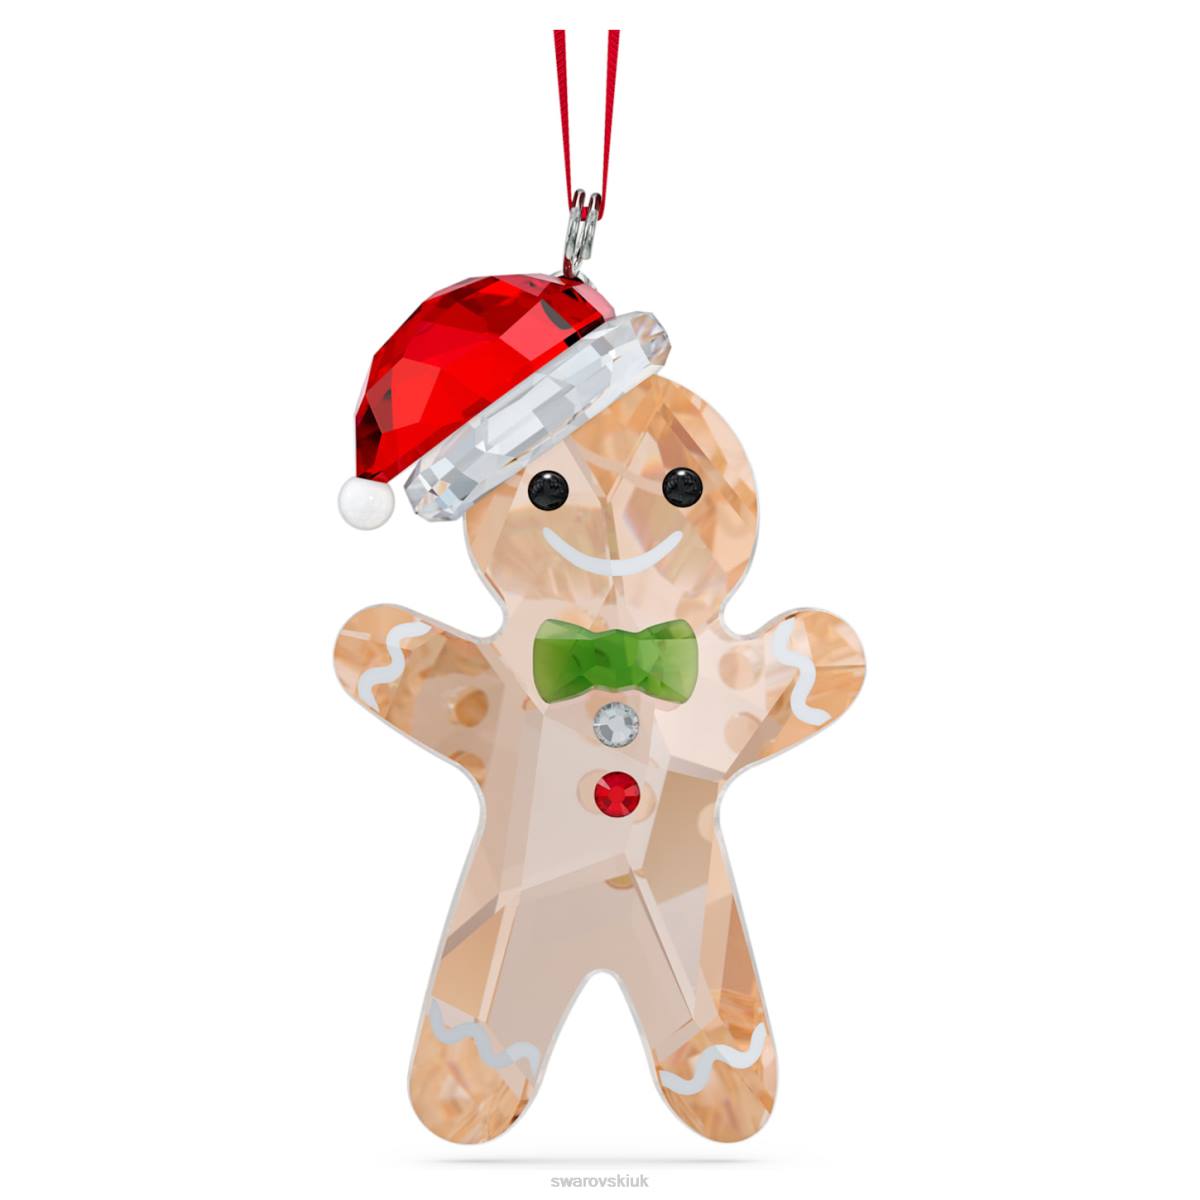 Decorations Swarovski Holiday Cheers Gingerbread Man Ornament Collection 48JX1814